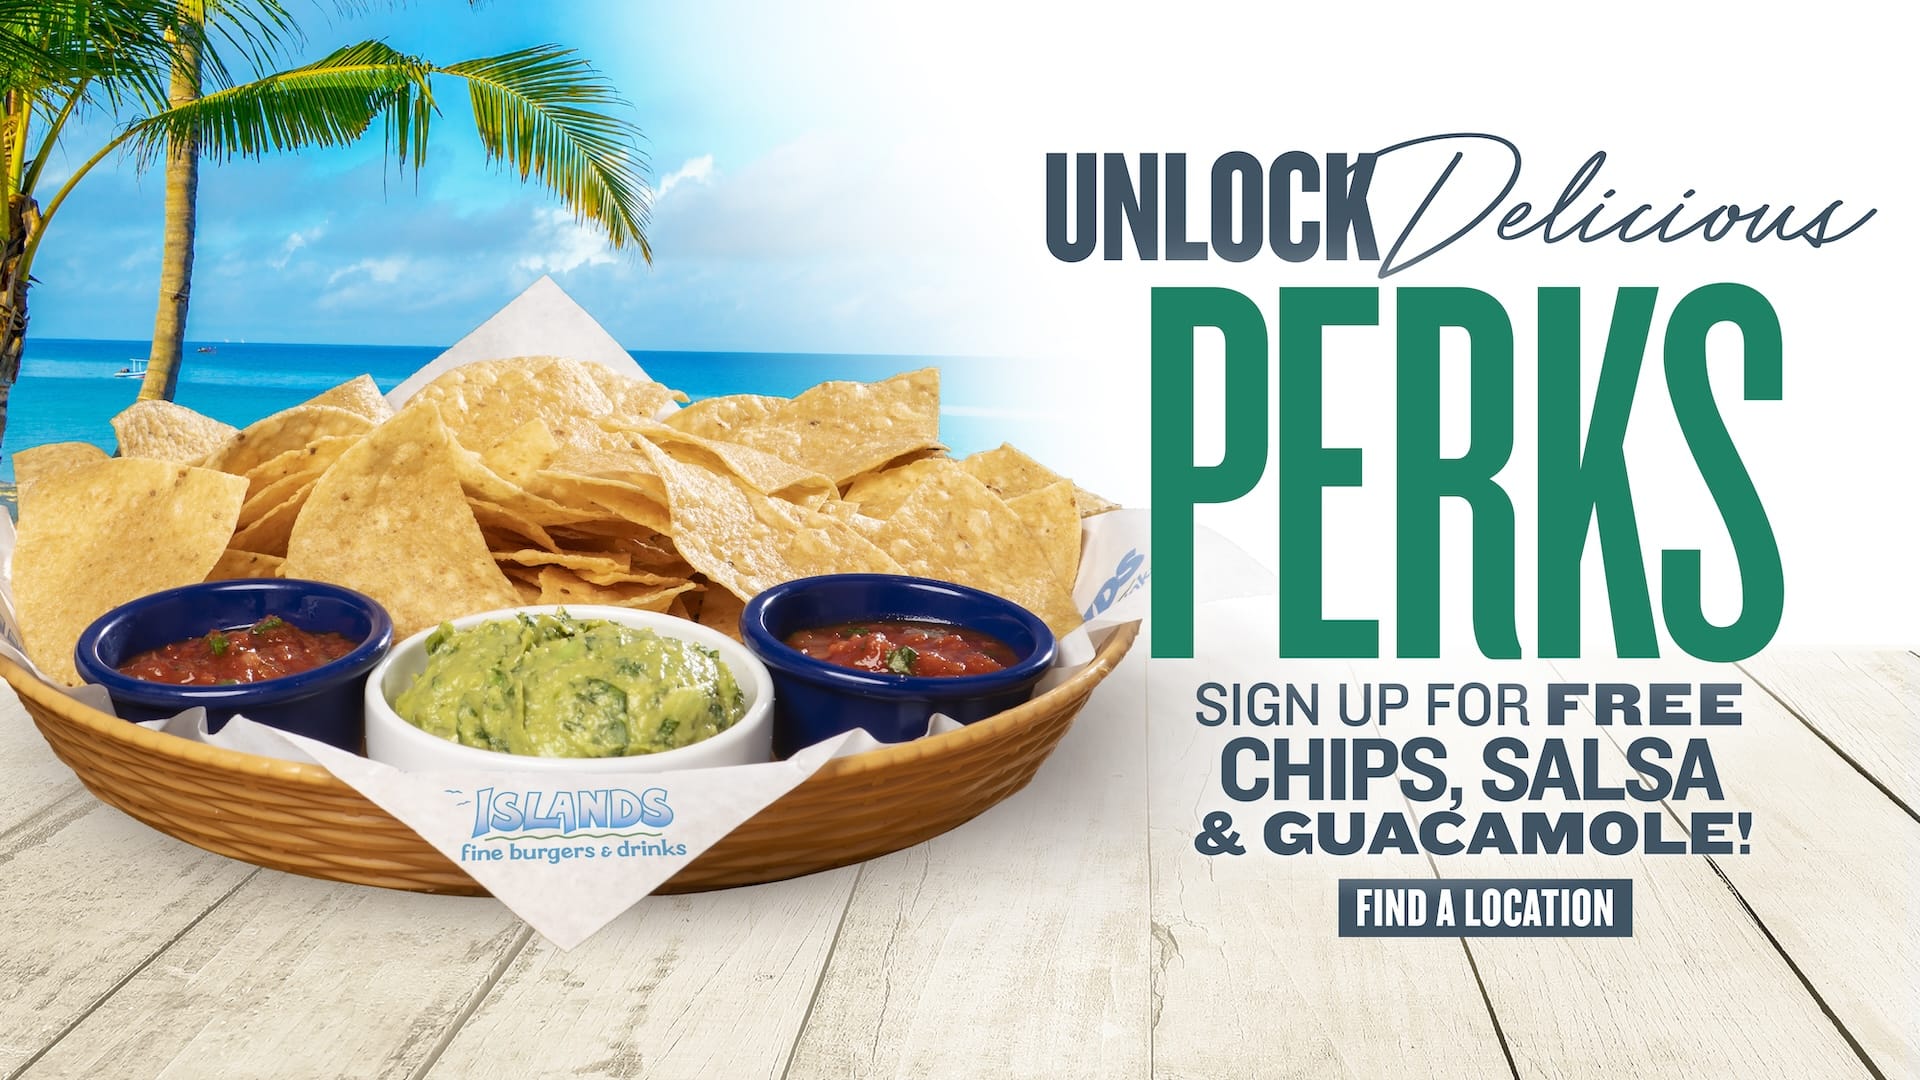 Unlock delicious perks - sign up for free chips, salsa & guacamole - find a location